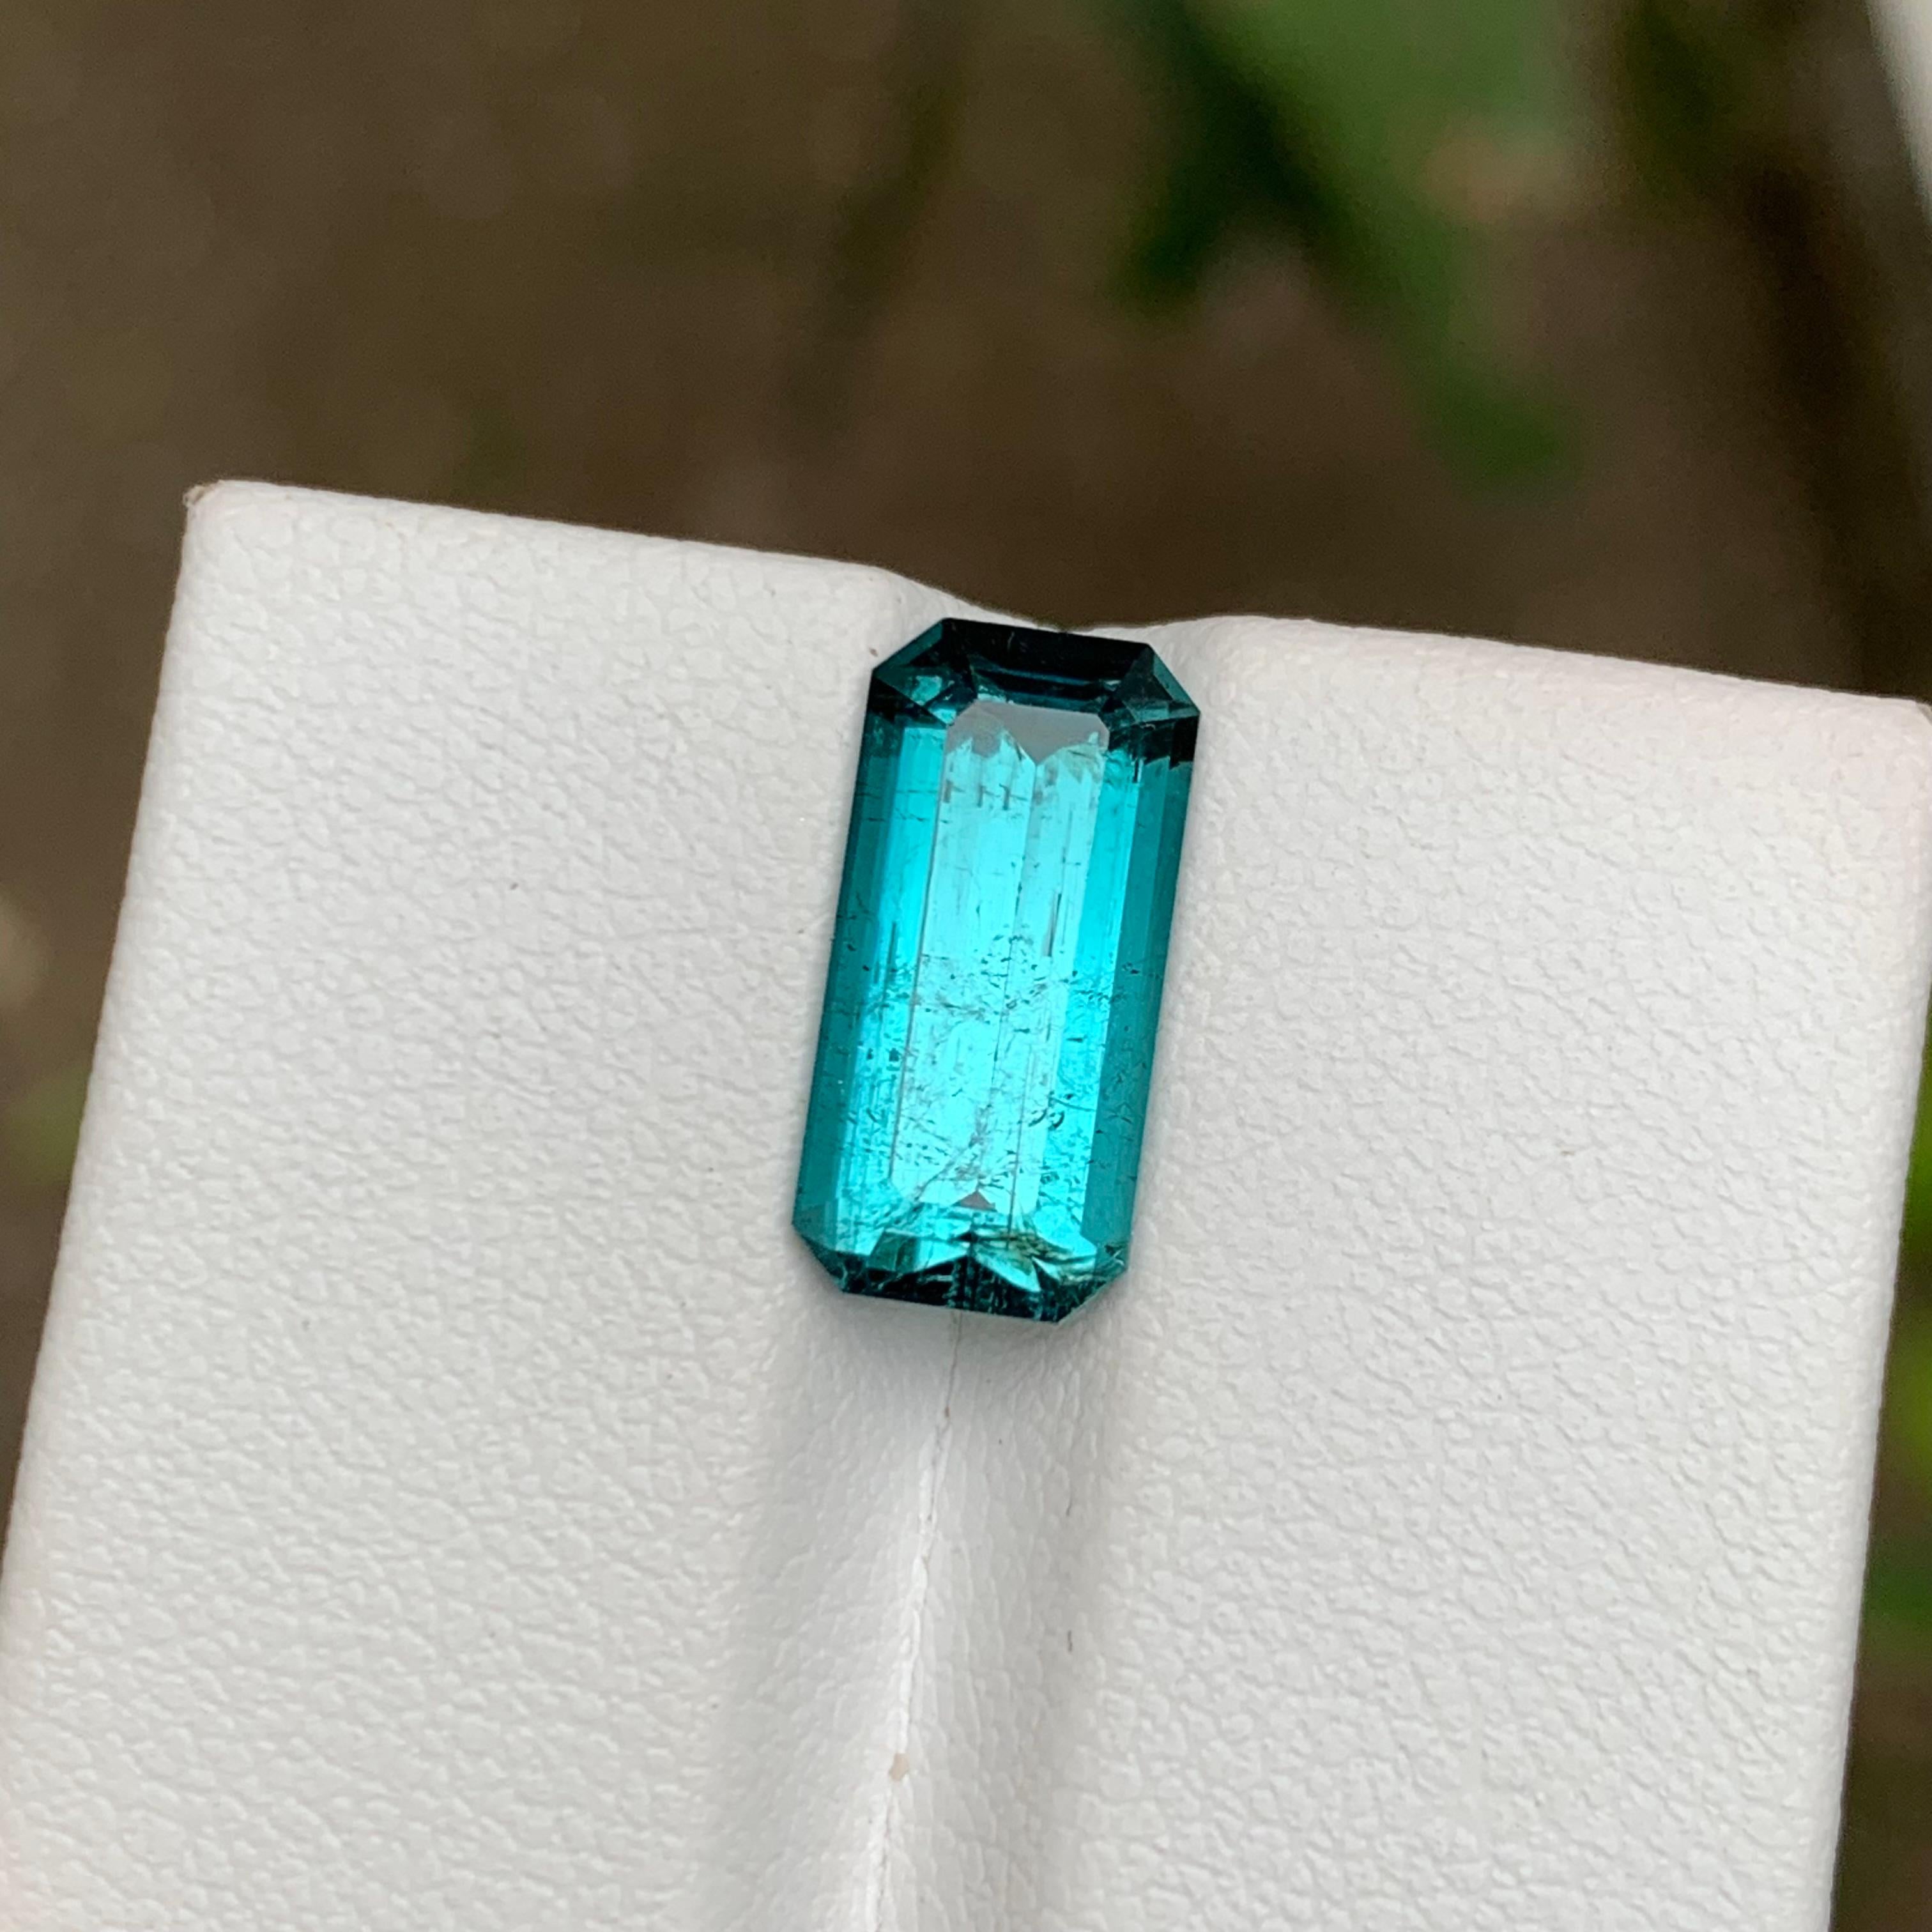 Rare Neon Blue Natural Tourmaline Gemstone, 4 Ct Emerald Cut for Ring/Jewelry AF For Sale 6